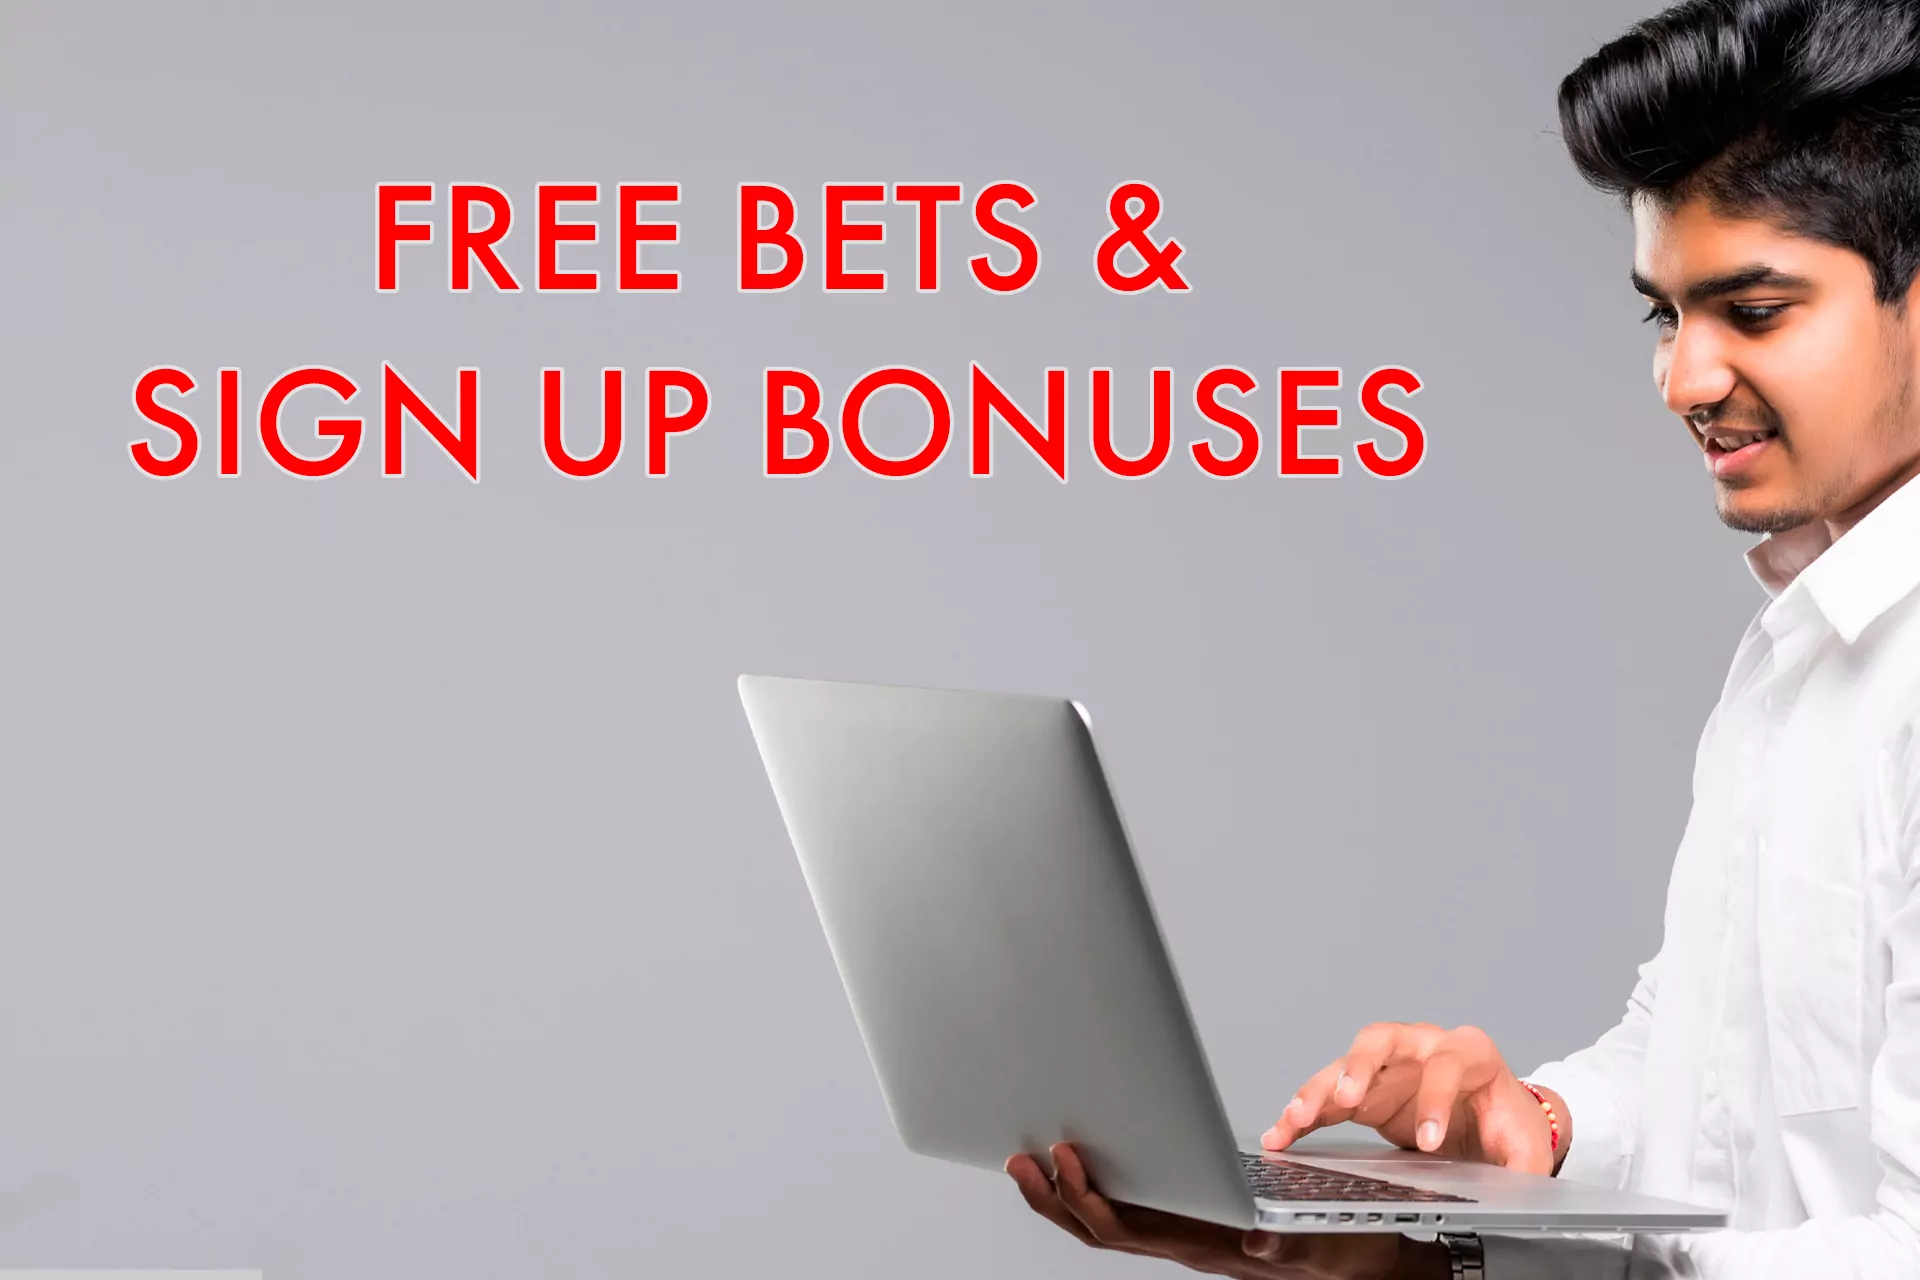 Free bets are another possibility for new and old users to get extra profit from the bookmaker.